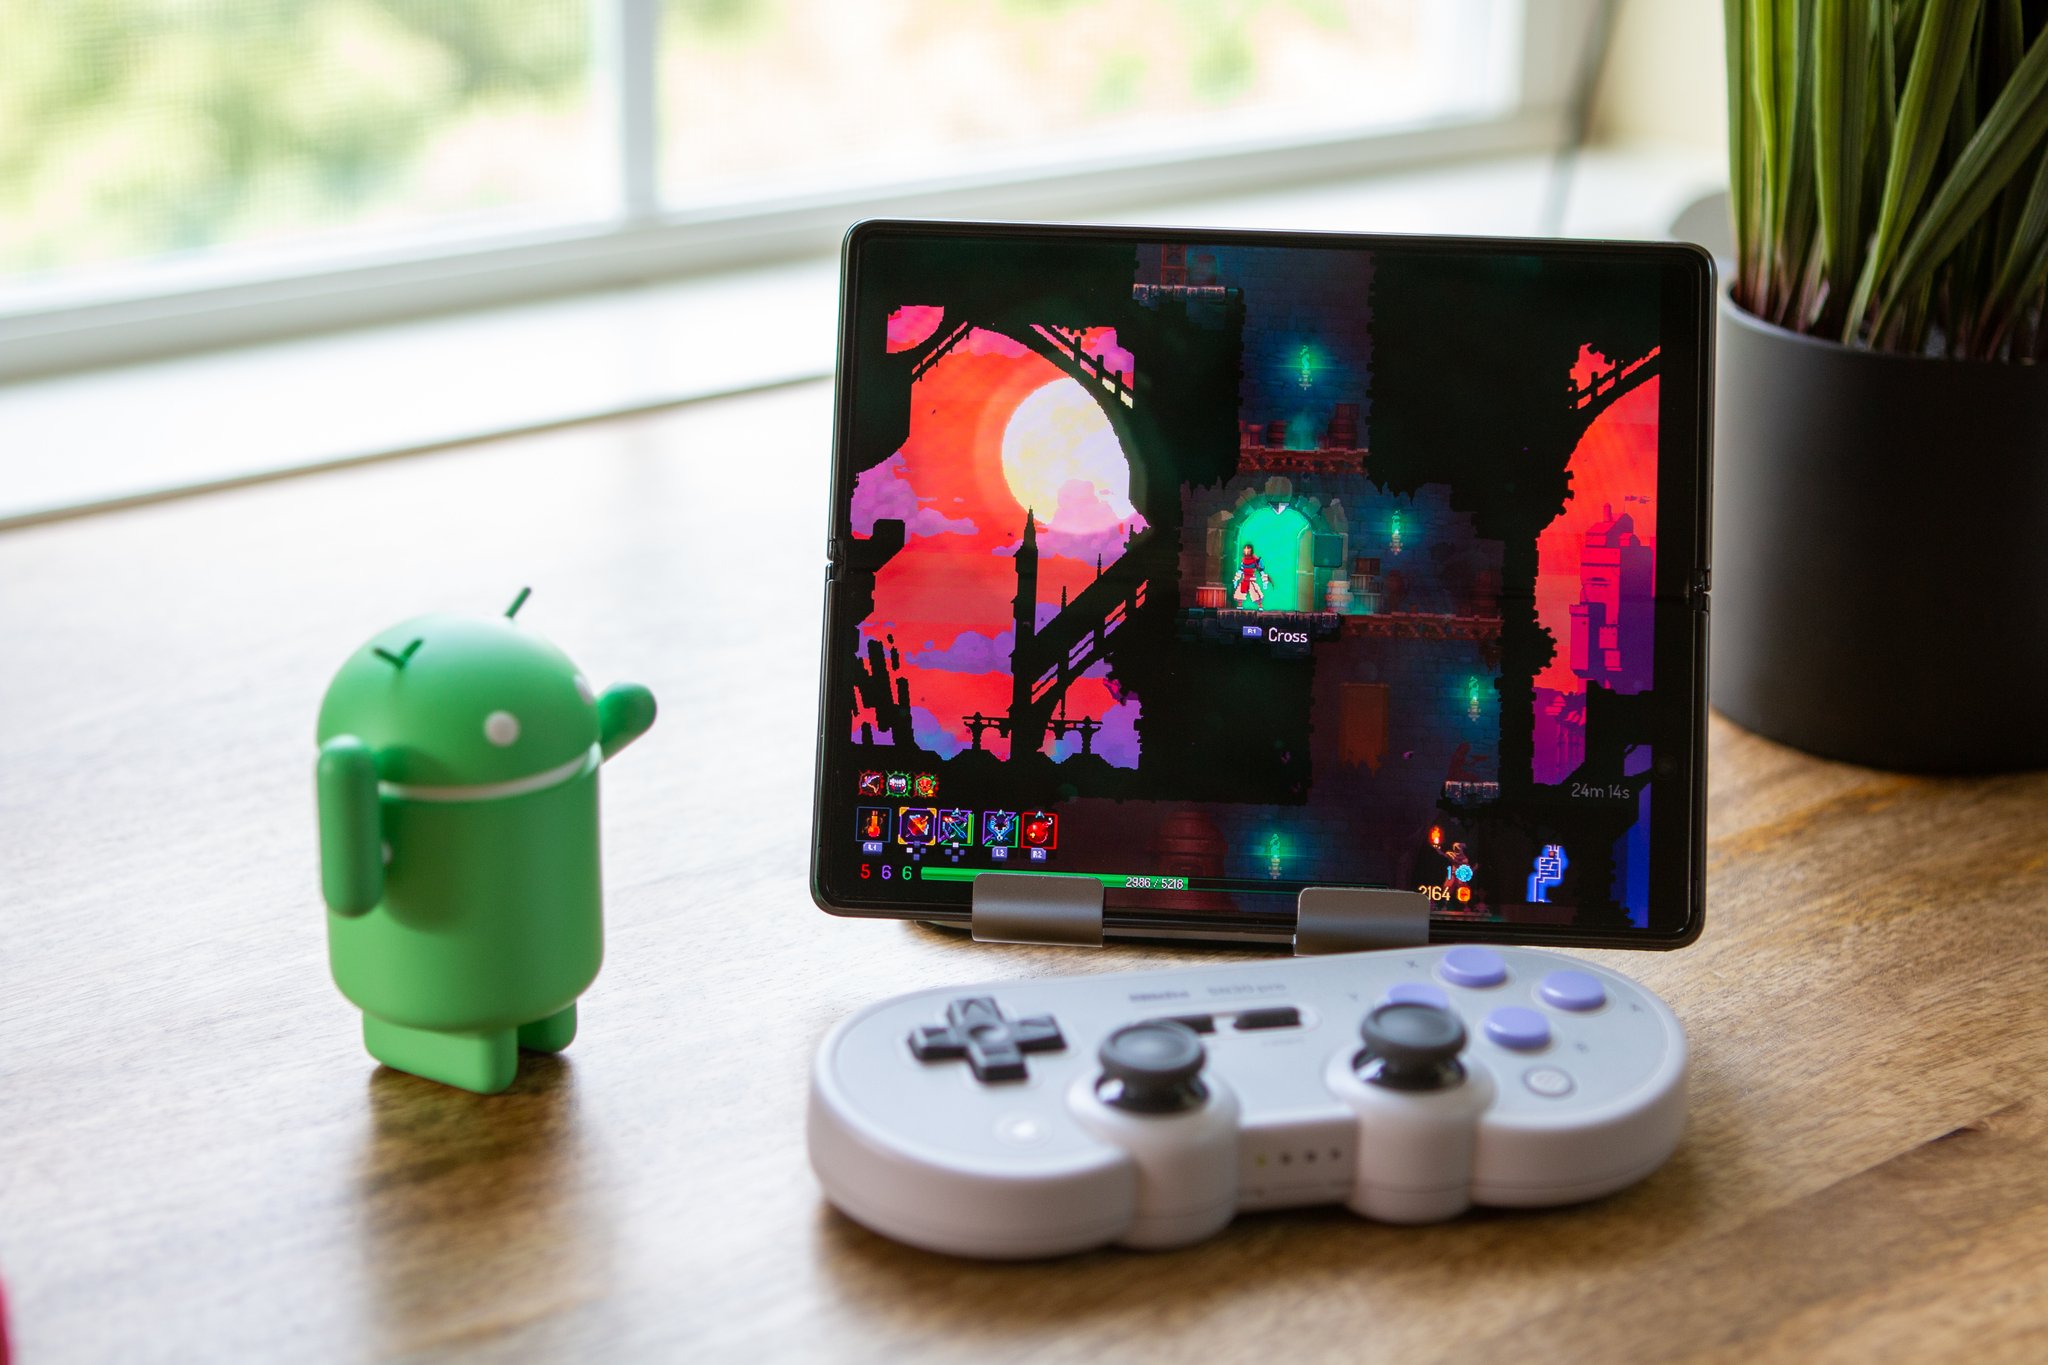 8Bitdo Sn30 Pro for Xbox cloud gaming on Android (includes clip) - Android  [video game] : : Games e Consoles